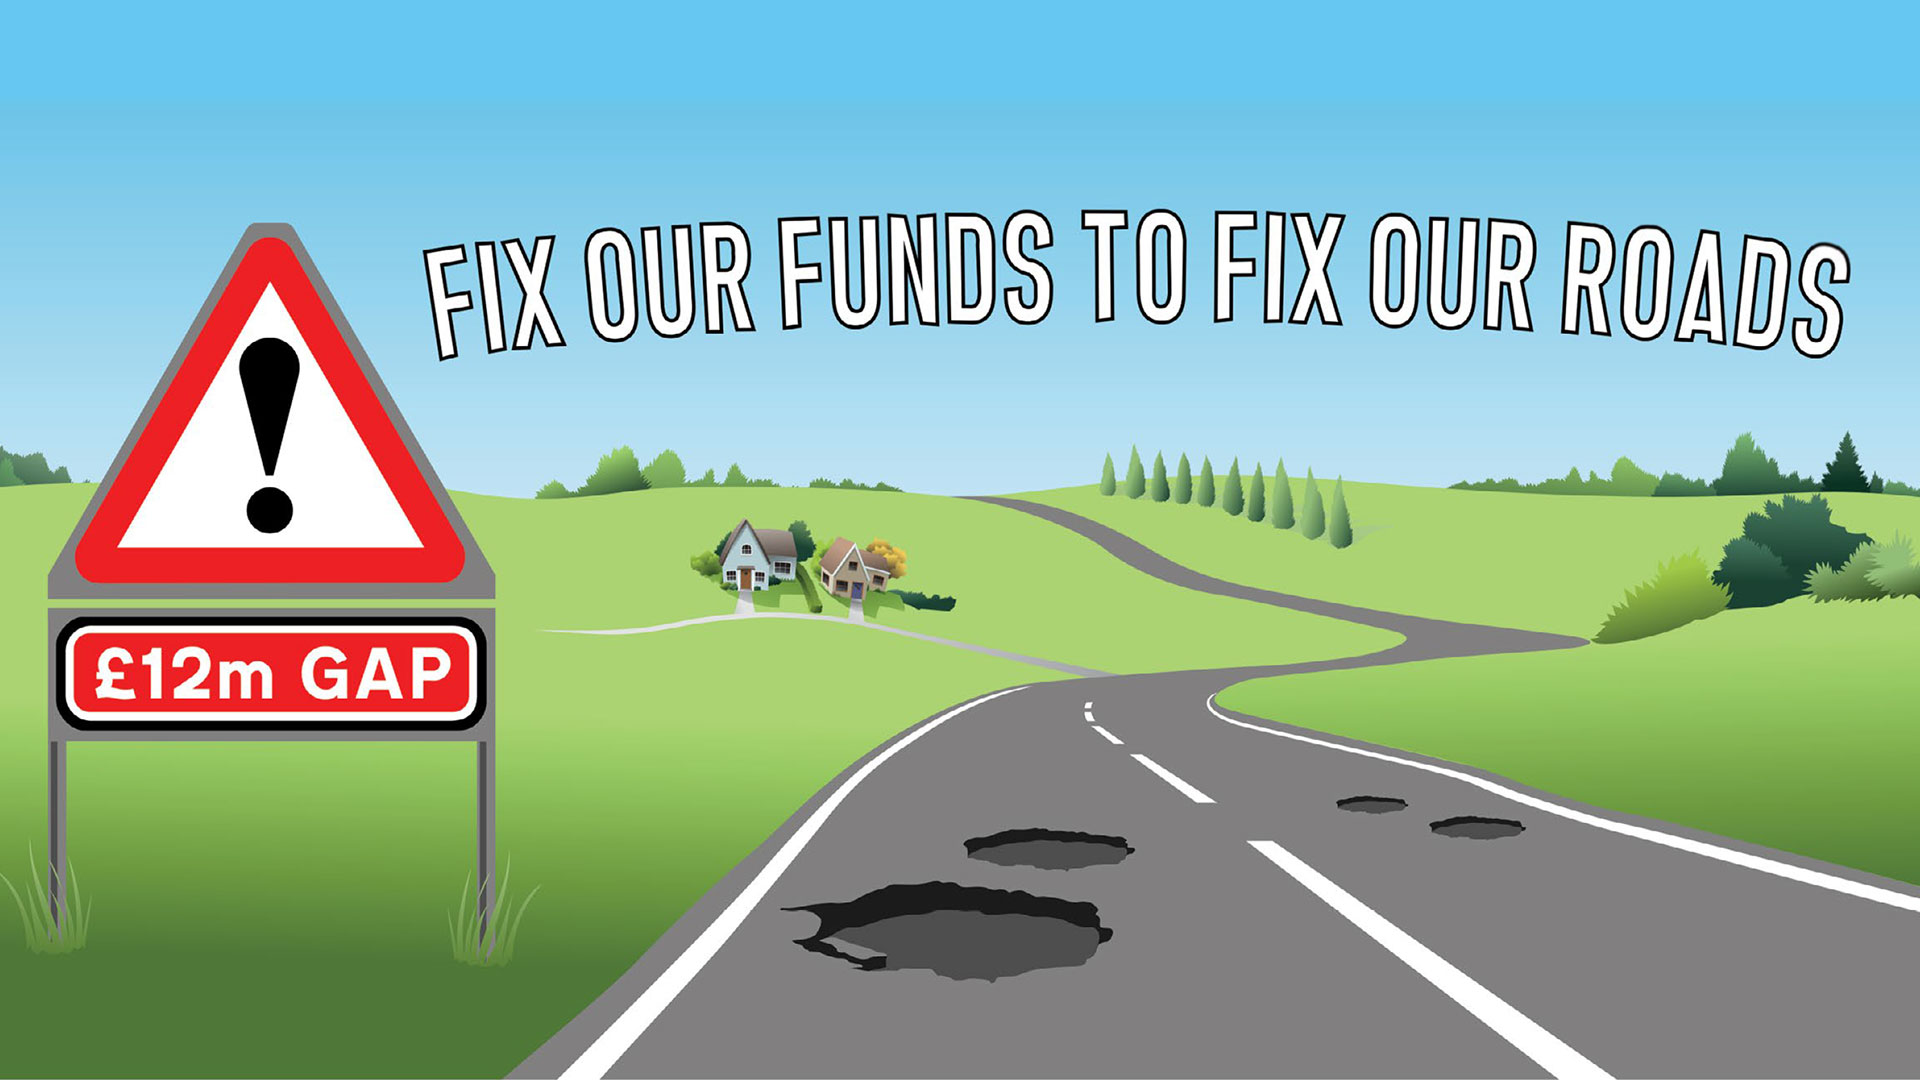 LCC campaign to raise funds to fix our roads